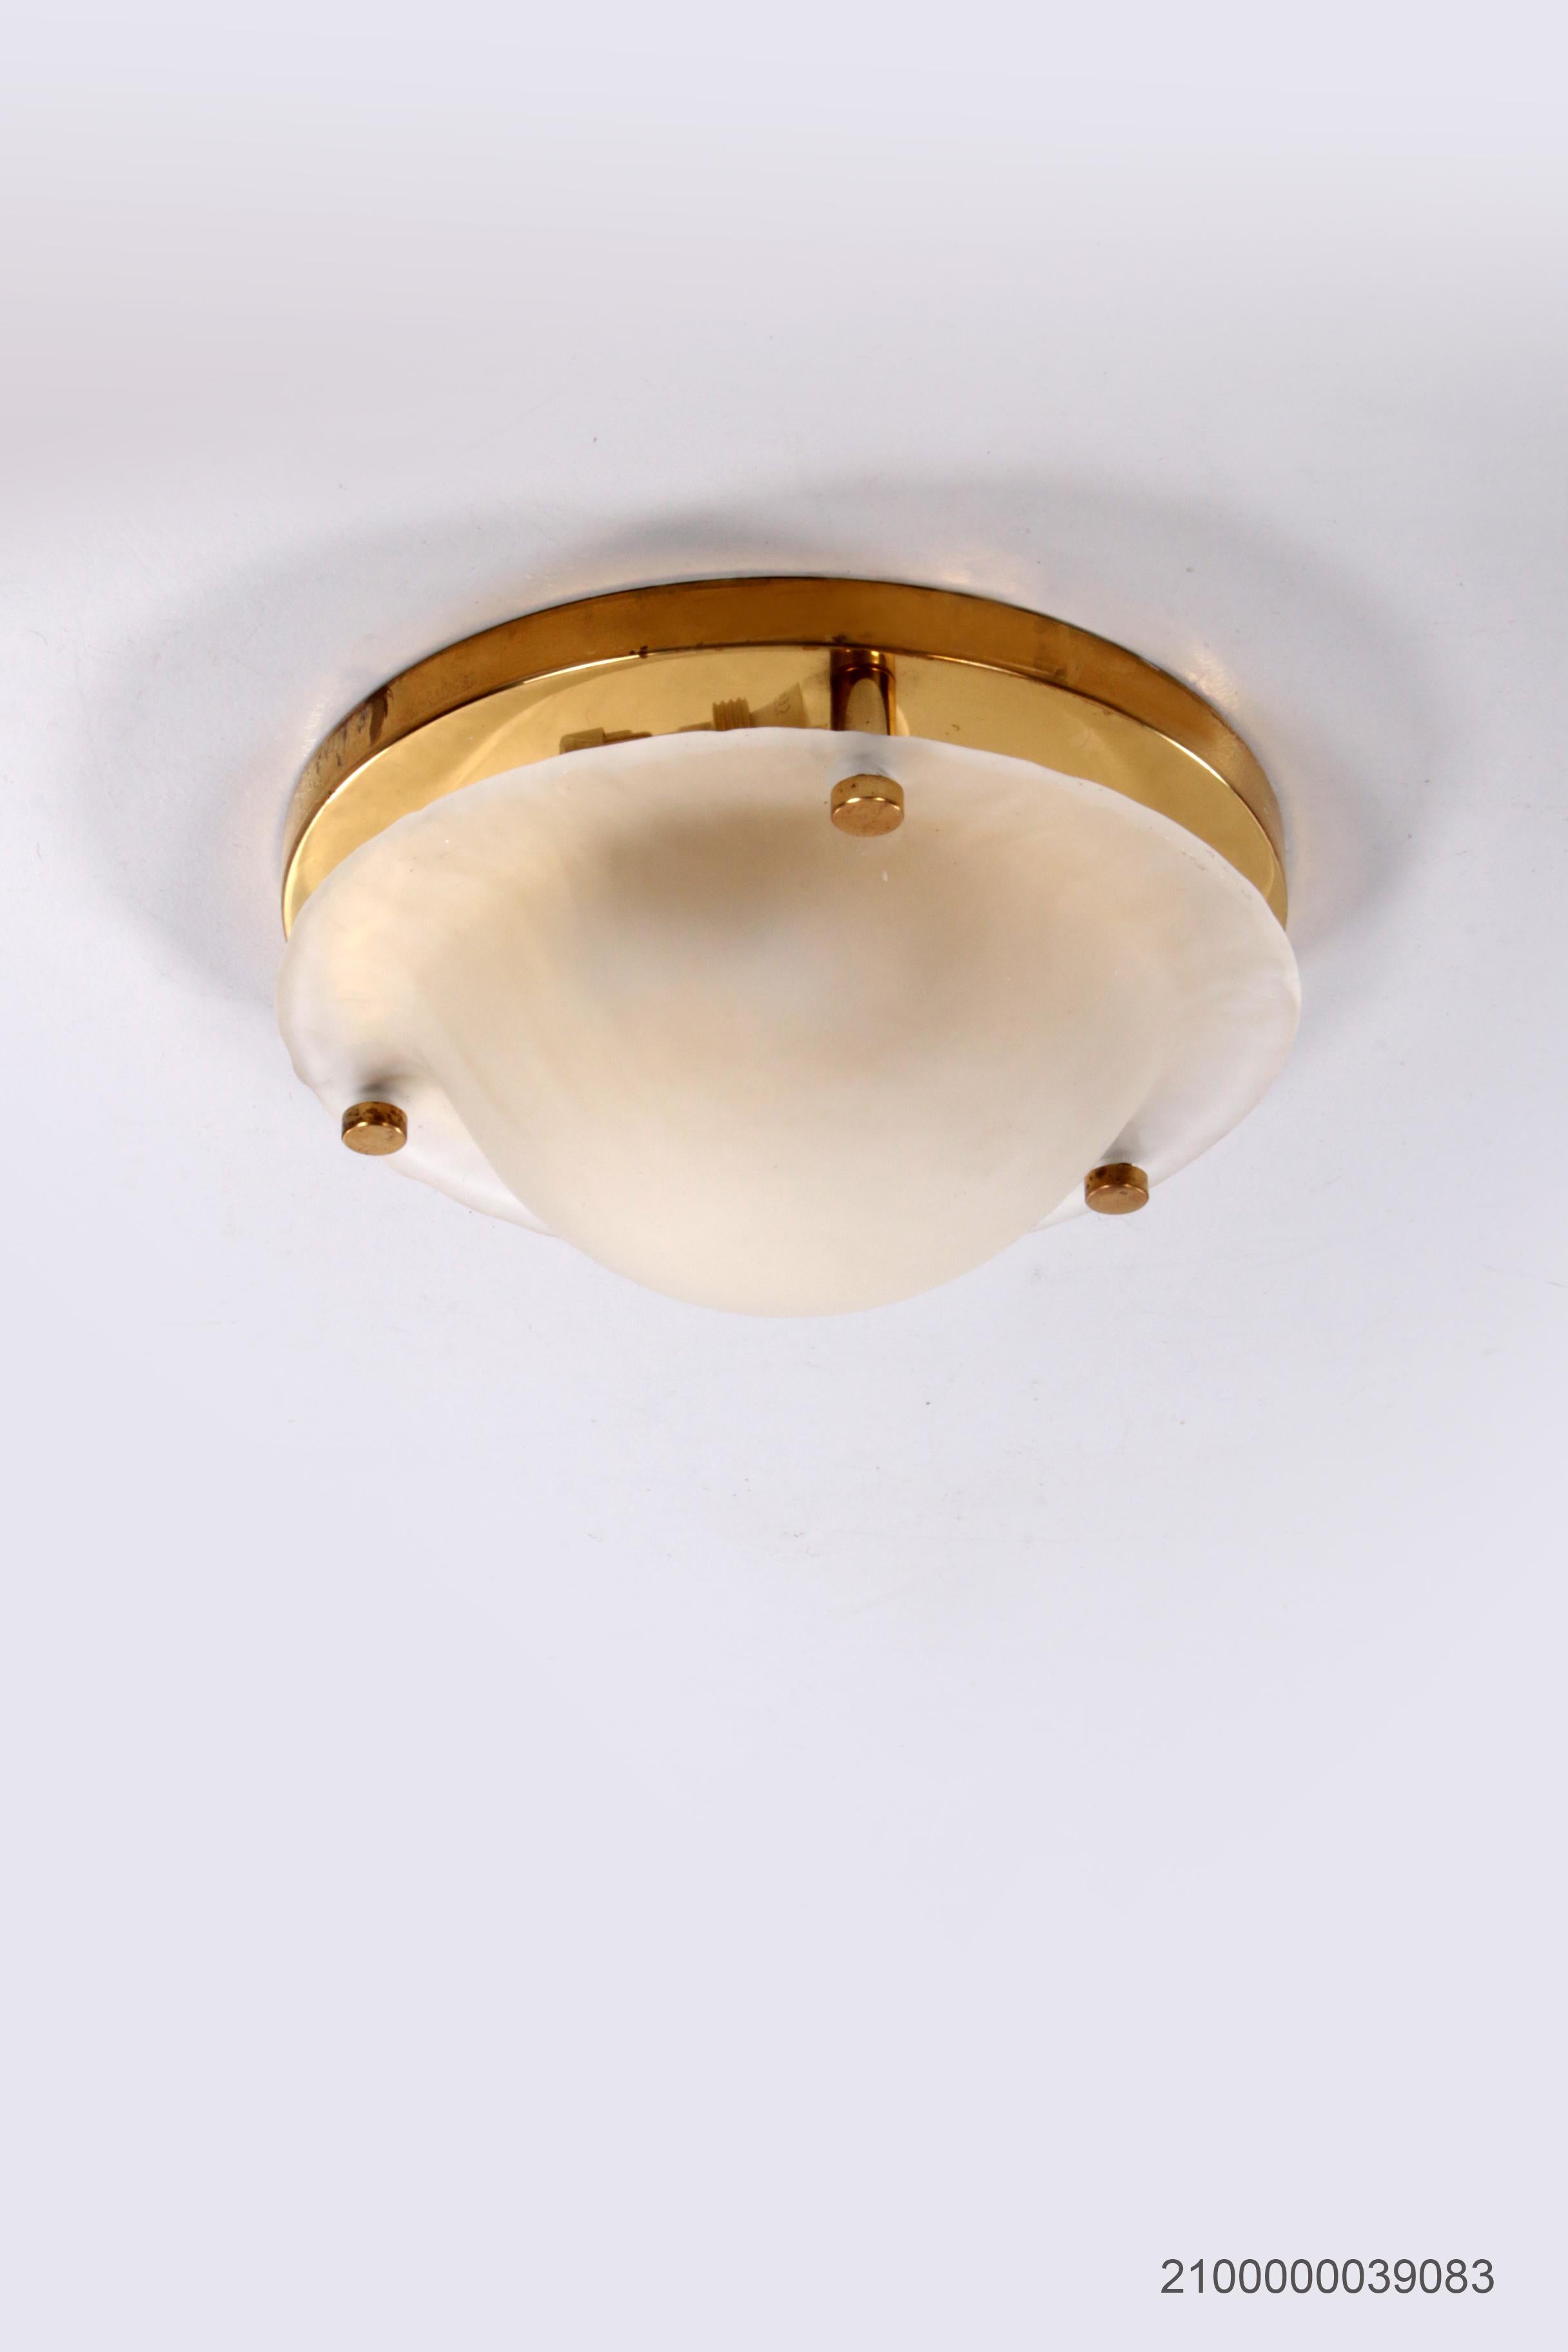 Vintage matt glass ceiling lamp from Fischer Leuchten

This is a beautiful ceiling lamp, with a brass mounting plate and brass buttons.

The glass plate is of nice thick quality and easy to attach.

We have two lamps in stock, the price is for 1